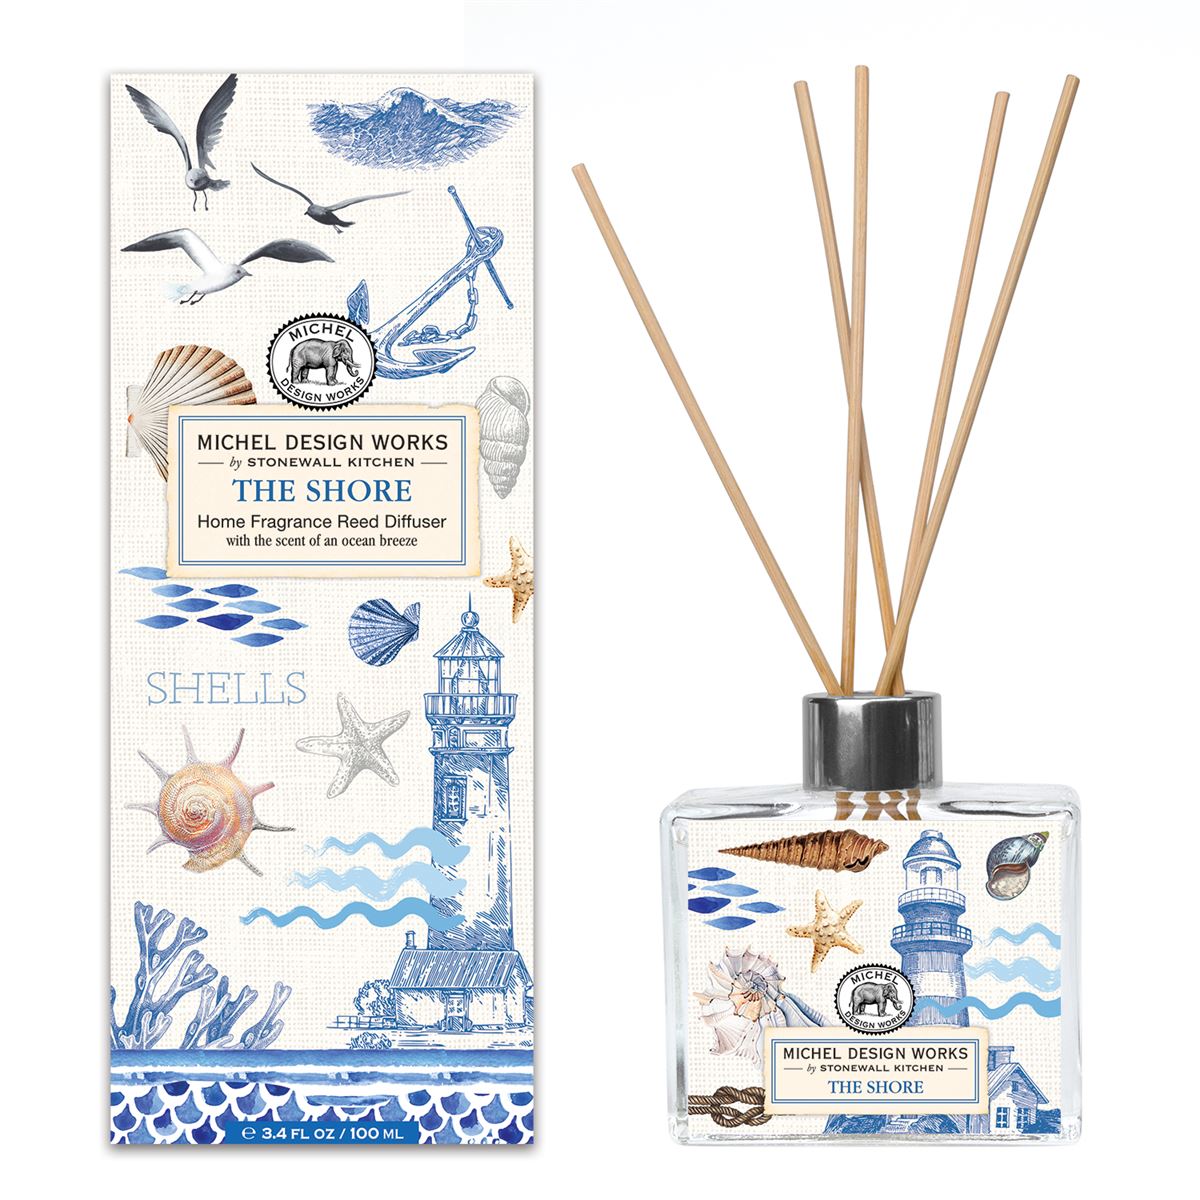 Michel Design Works - The Shore Home Fragrance Reed Diffuser